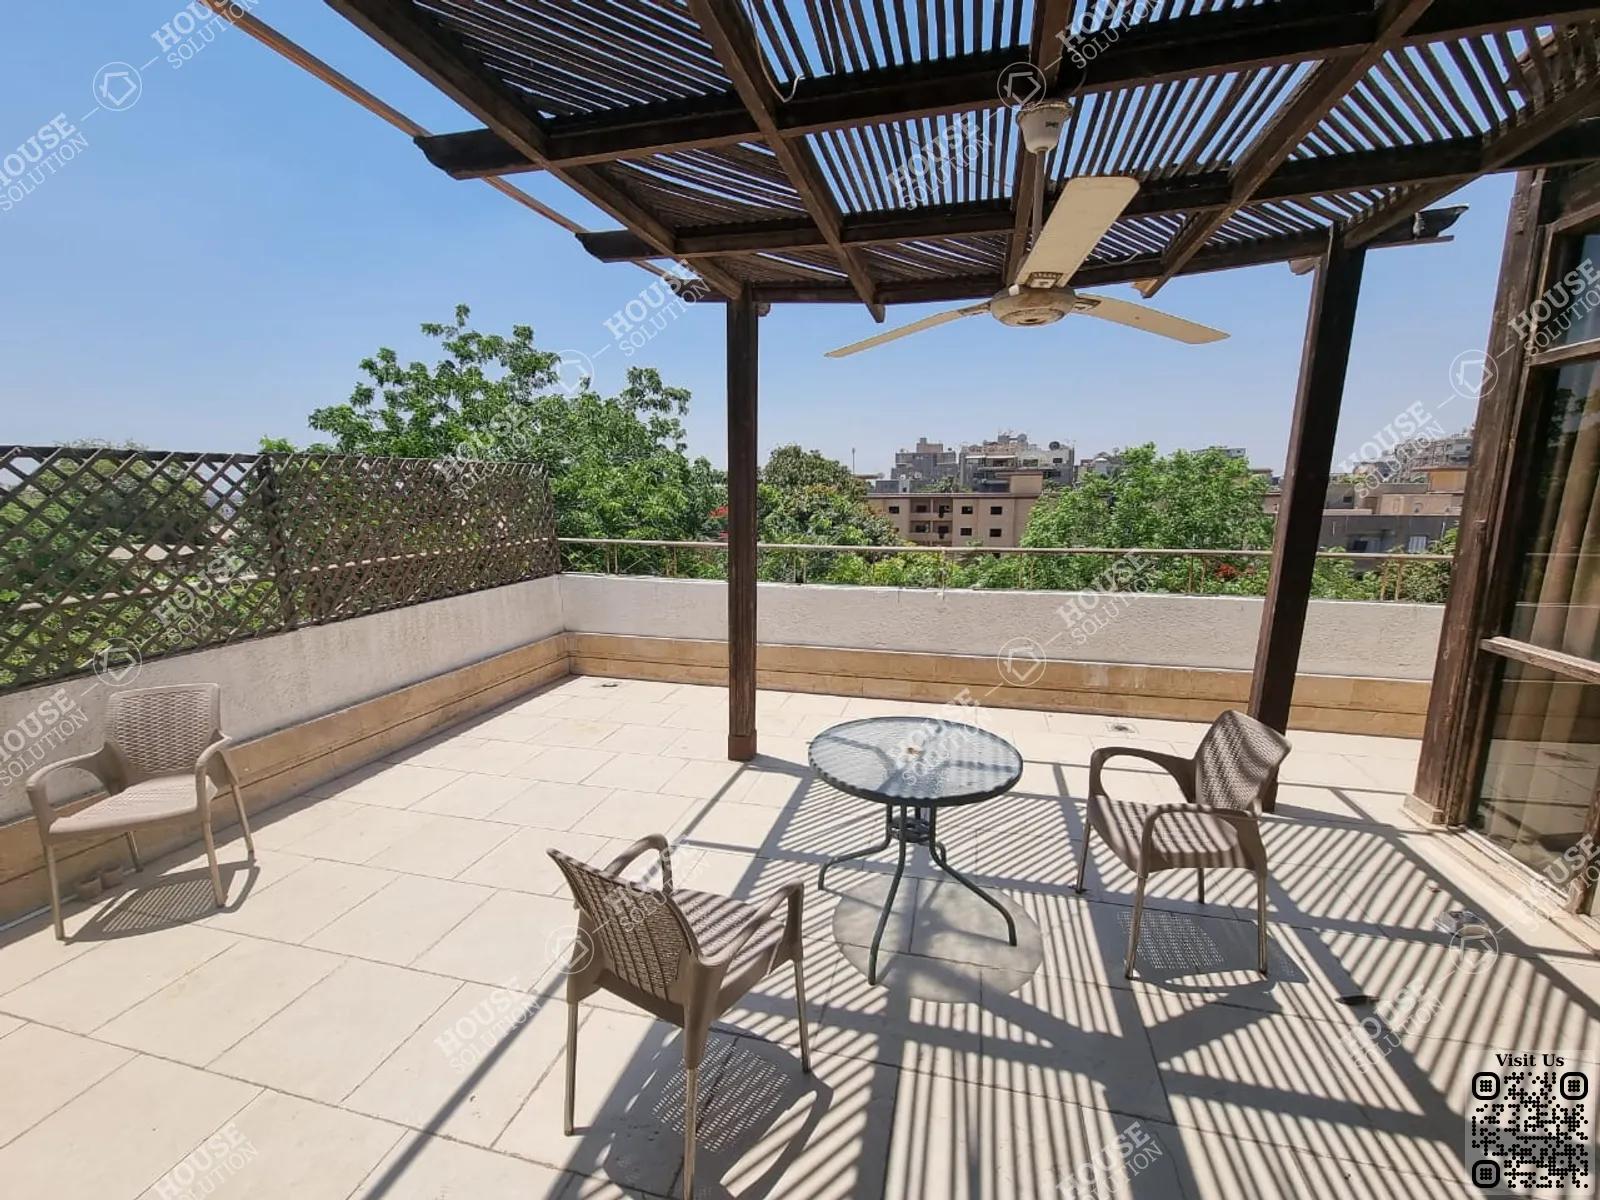 TERRACE  @ Penthouses For Rent In Maadi Maadi Sarayat Area: 300 m² consists of 4 Bedrooms 4 Bathrooms Modern furnished 5 stars #2920-2